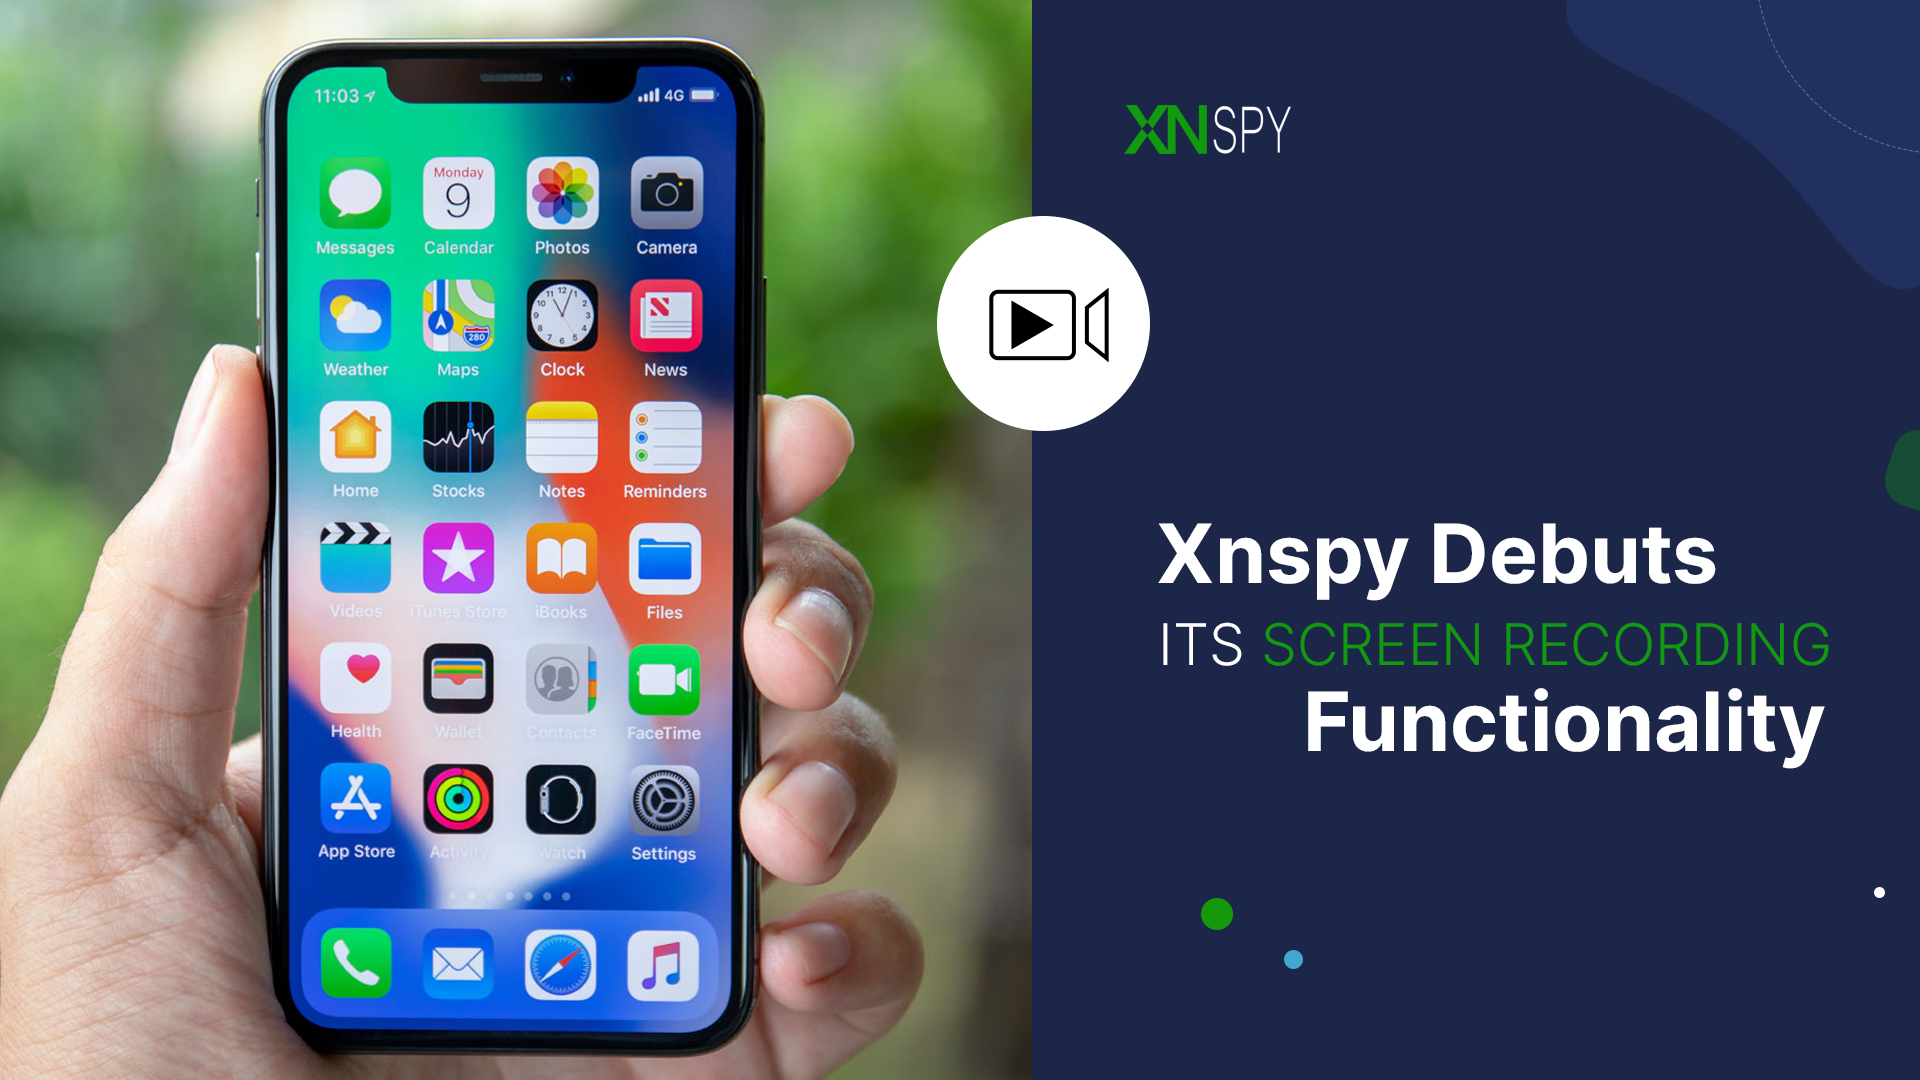 Xnspy Debuts Its Screen Recording Functionality